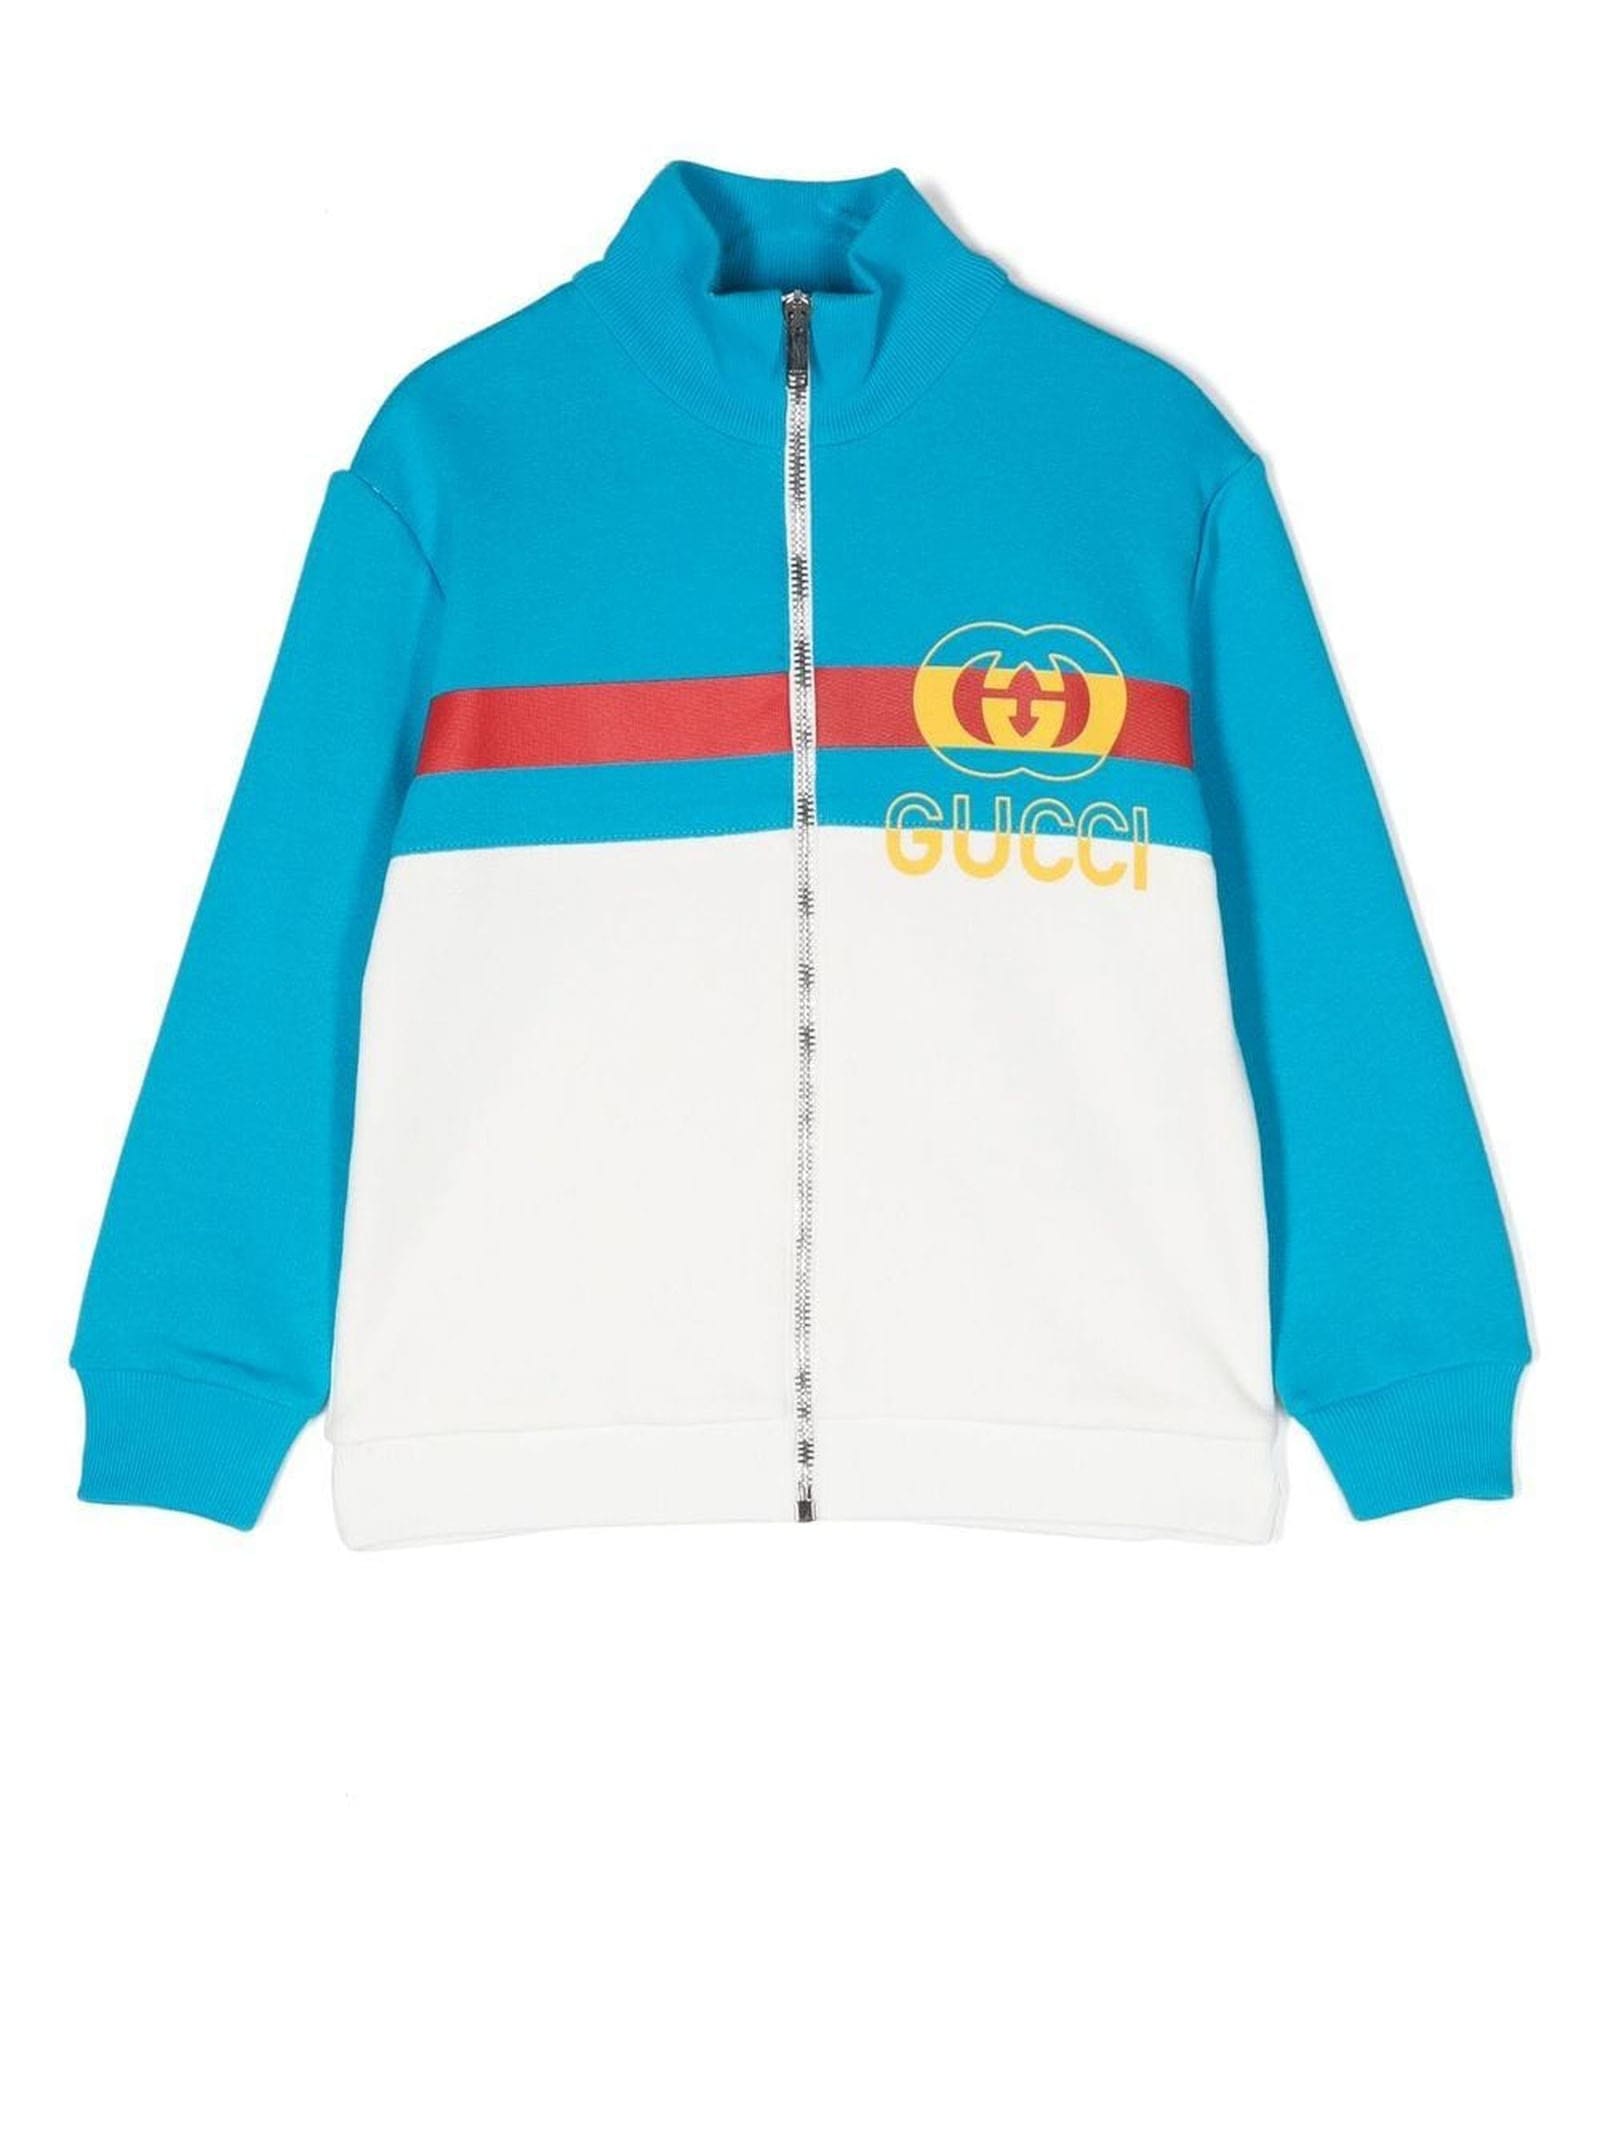 Gucci Blue And White Cotton Track Jacket